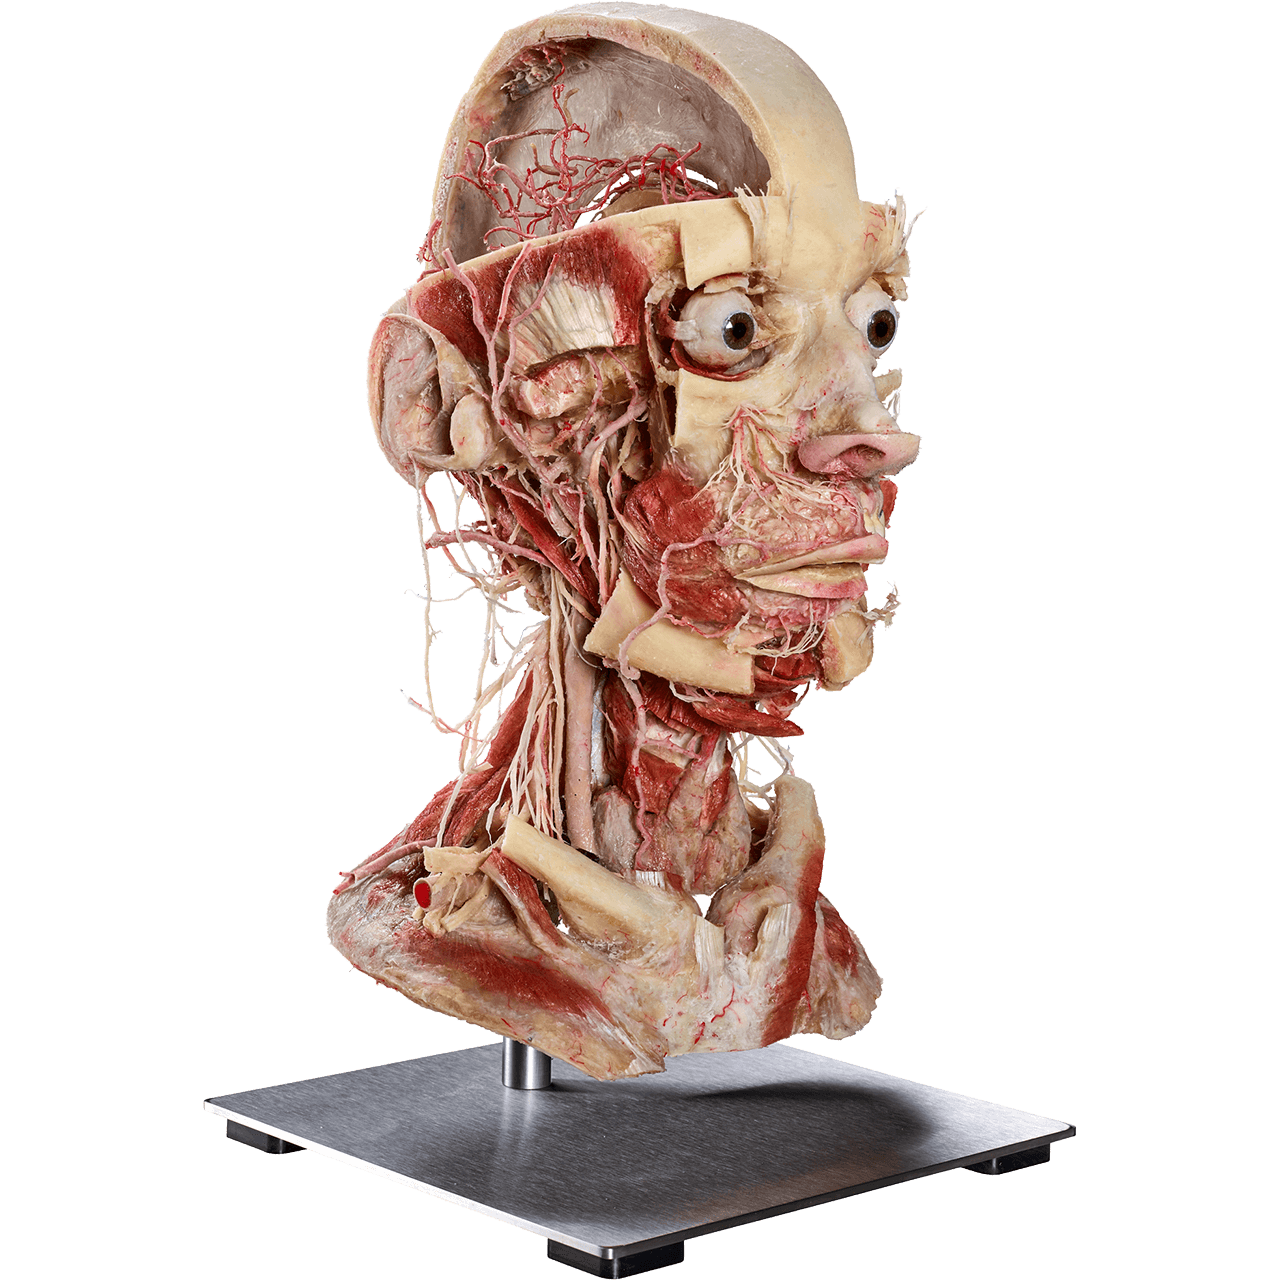 Plastinated human head and neck from Anatomic Excellence and von Hagens Plastination